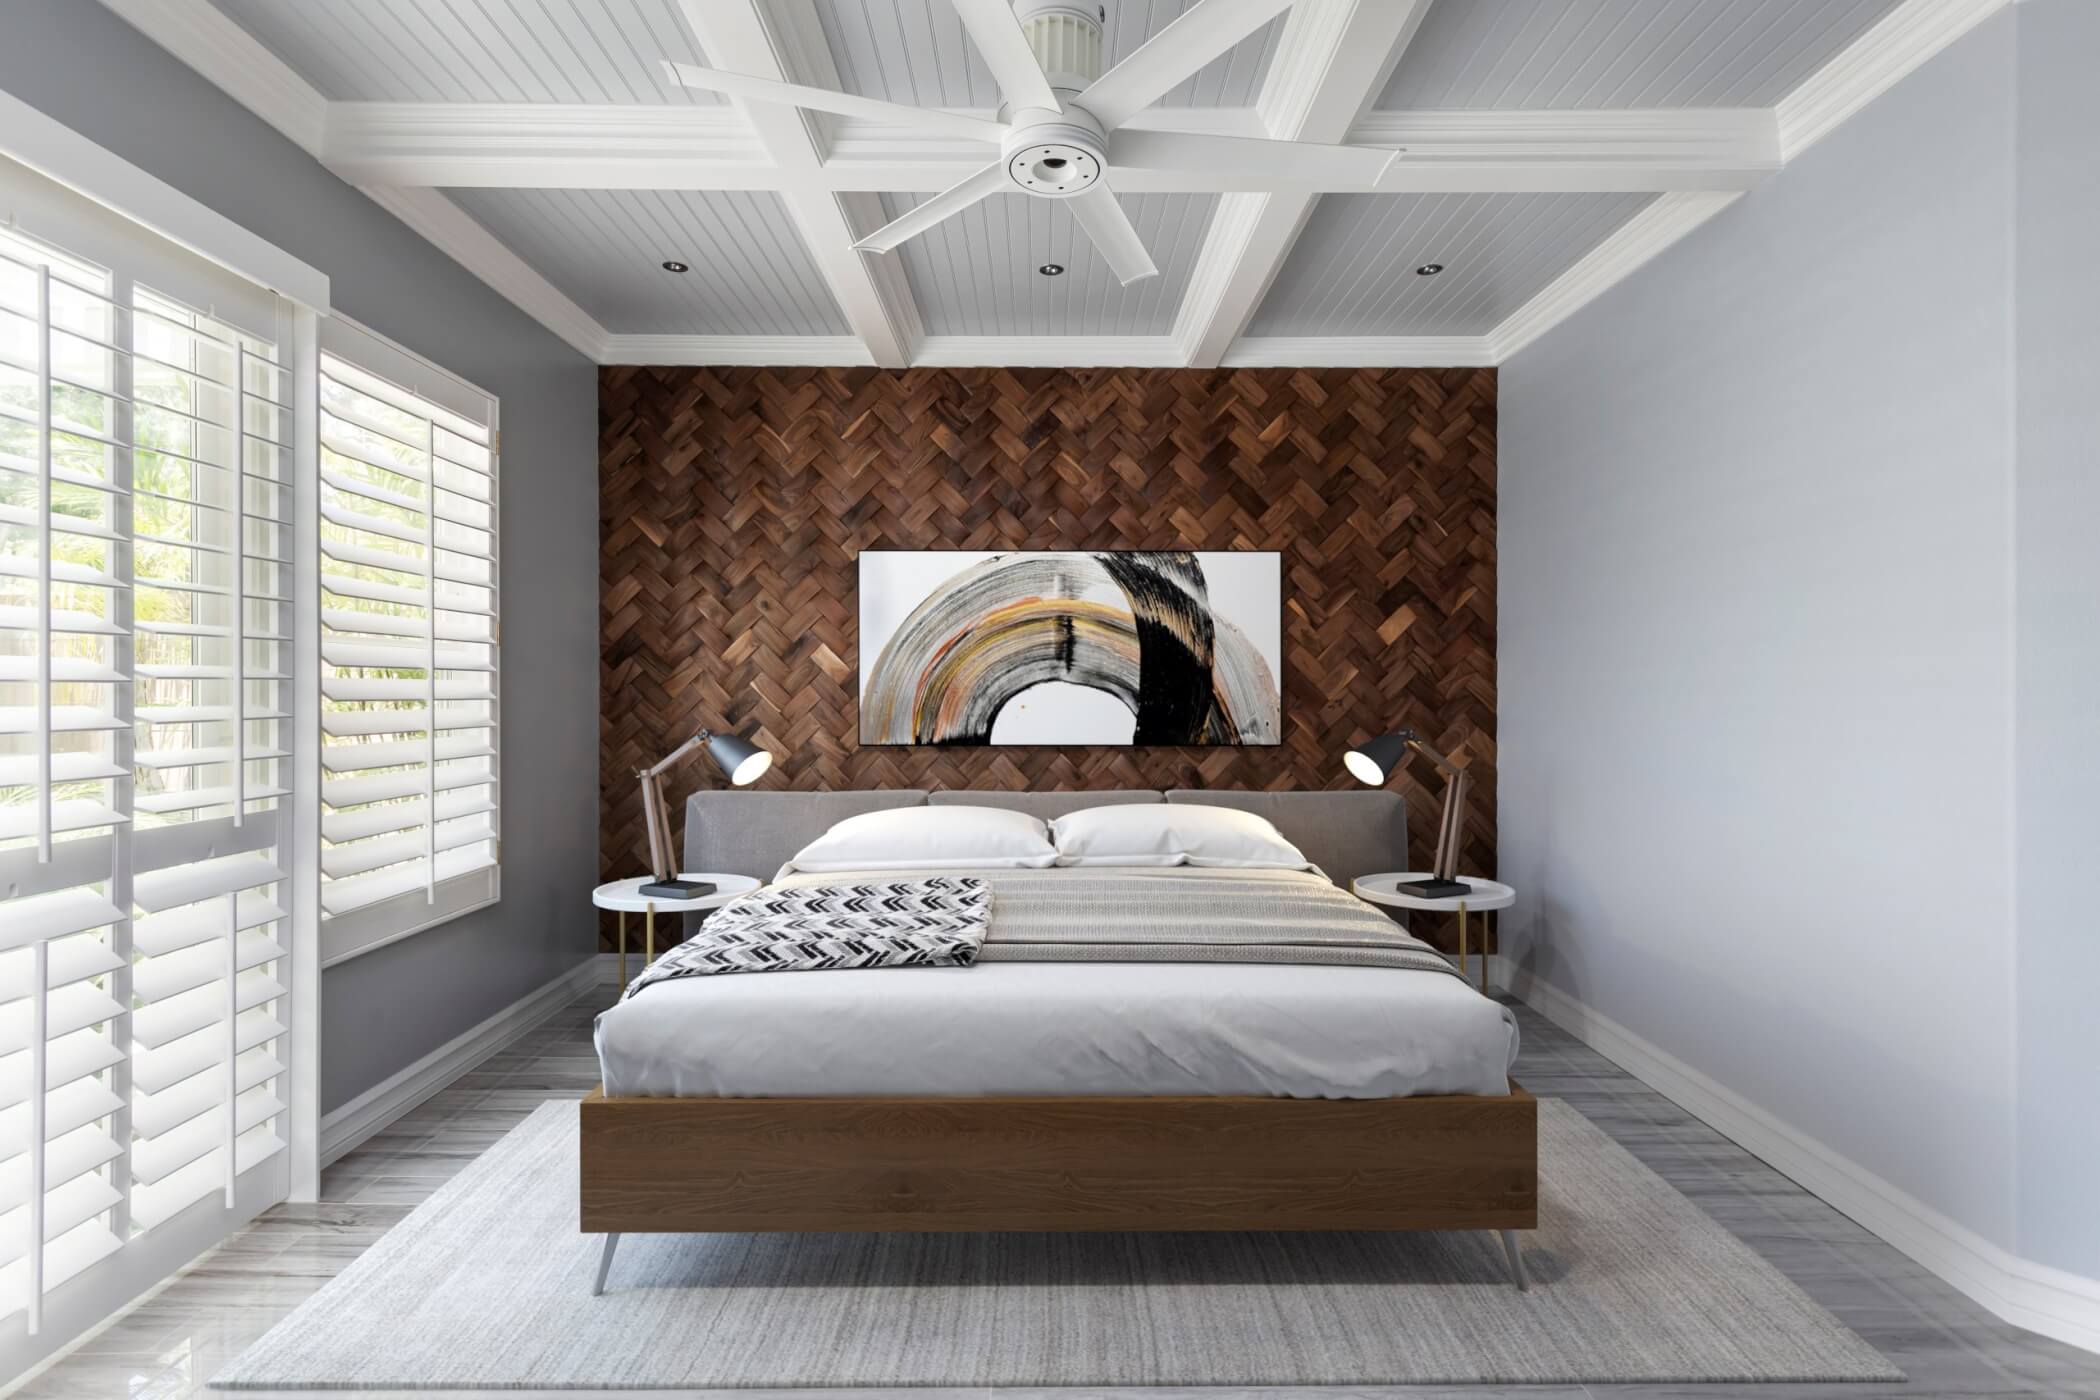 Remove term: remodeling your master bedroom remodeling your master bedroom